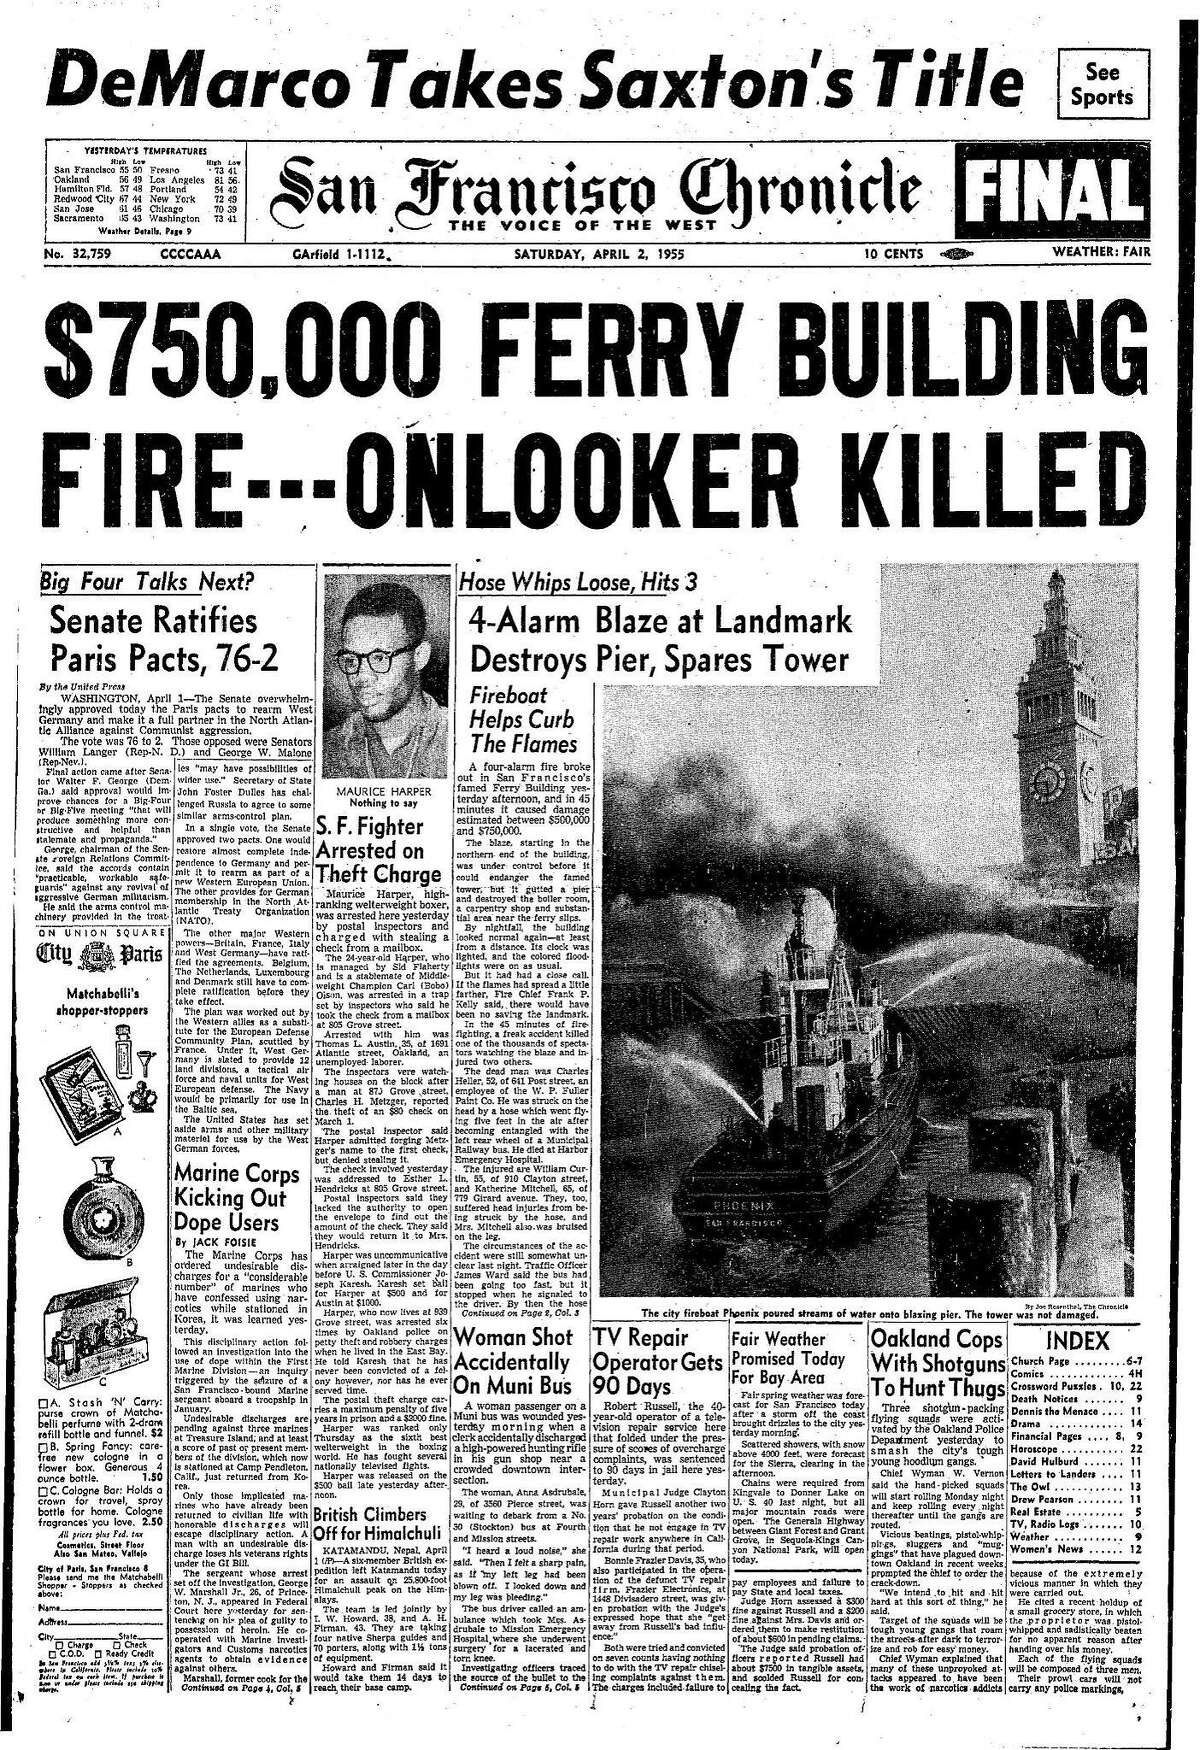 Historic Chronicle Front Page April 2, 1955 Massive fire at the Ferry Building in San Francisco Chron365, Chroncover